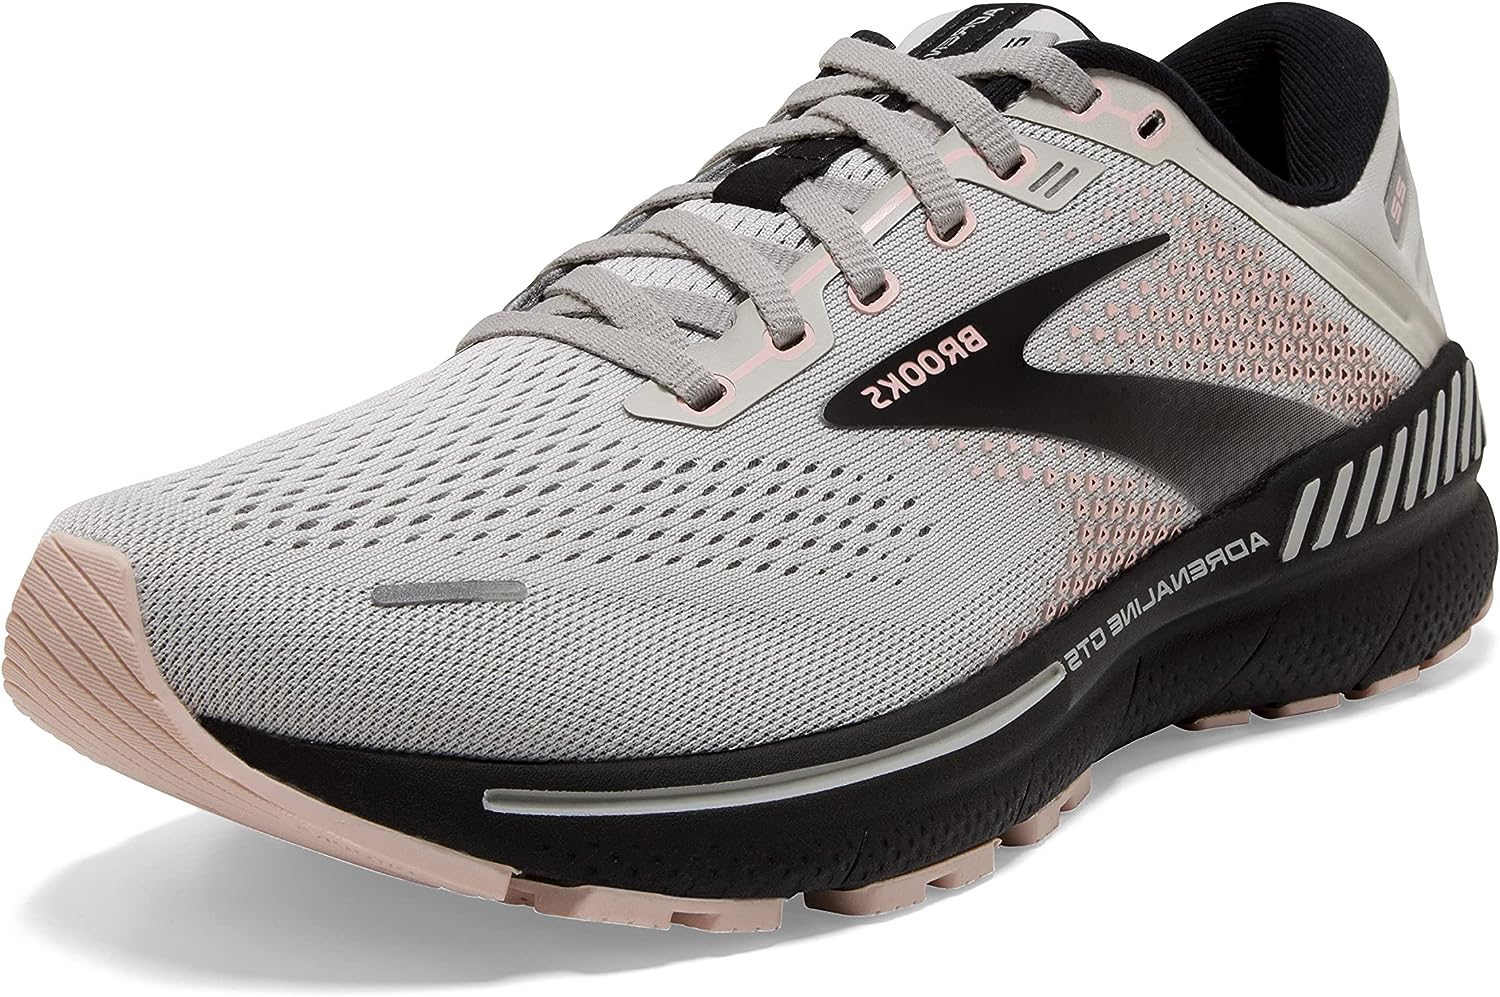 running shoes for inward pronation detailed review